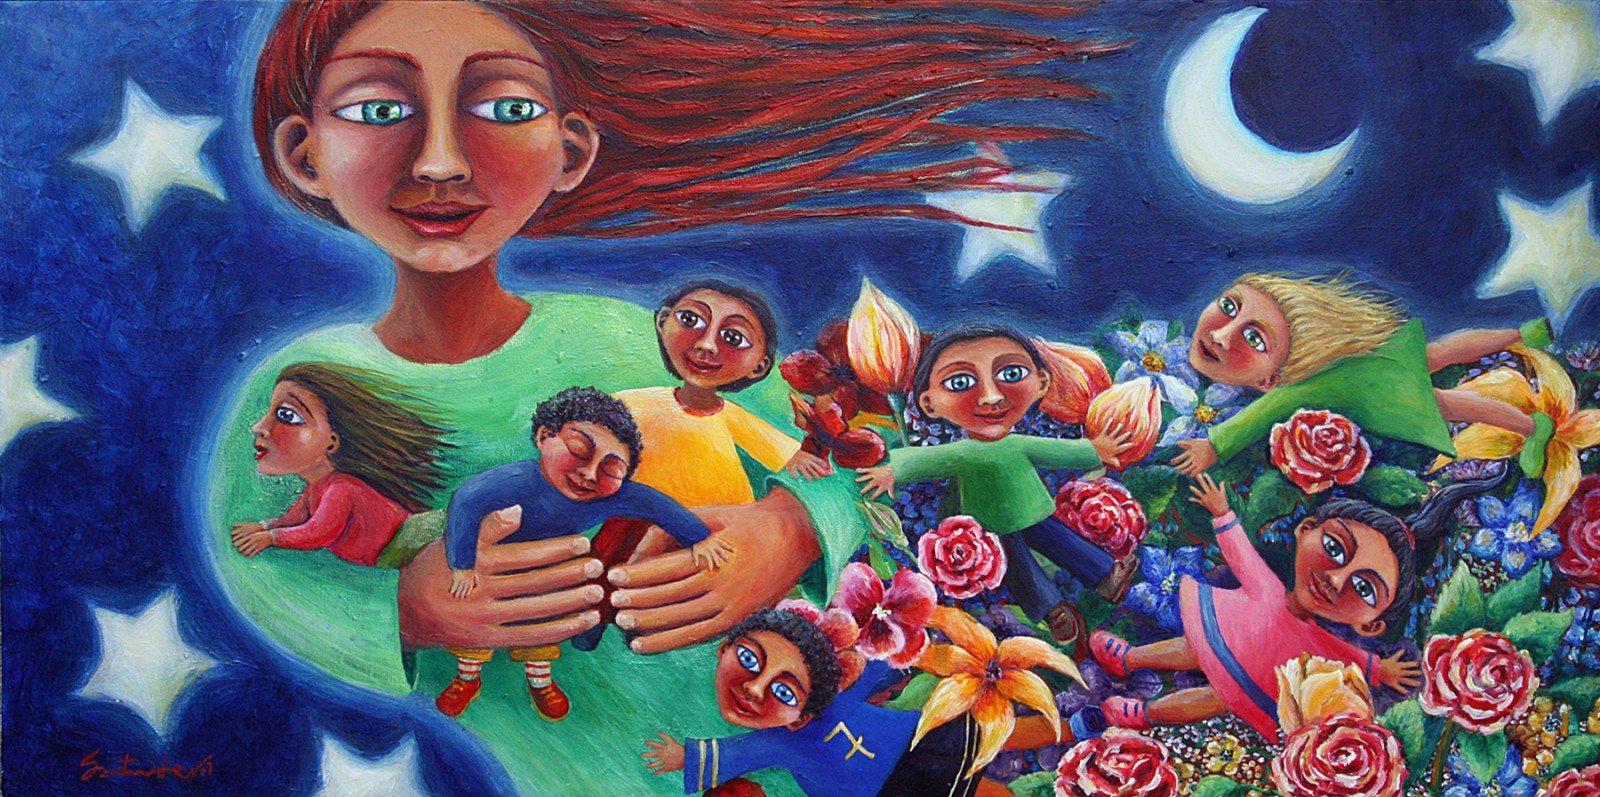 mother earth children indigenous angels occupy happy walk among things heal movement mom instead moms flowers need card mothers